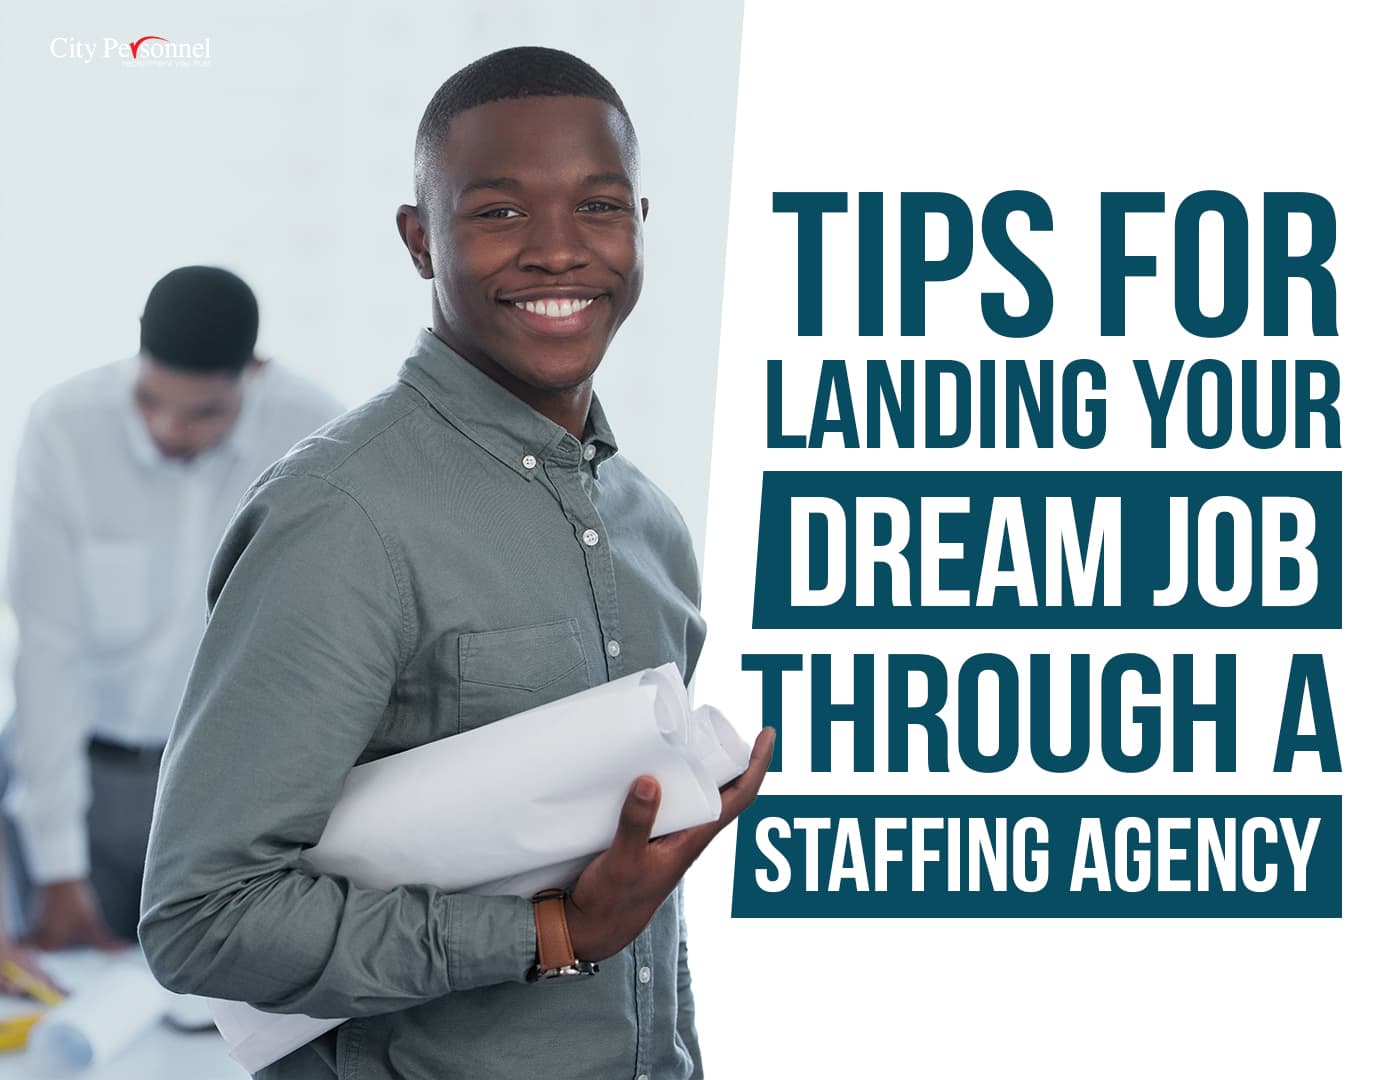 tips for landing your dream job through a staffing agency